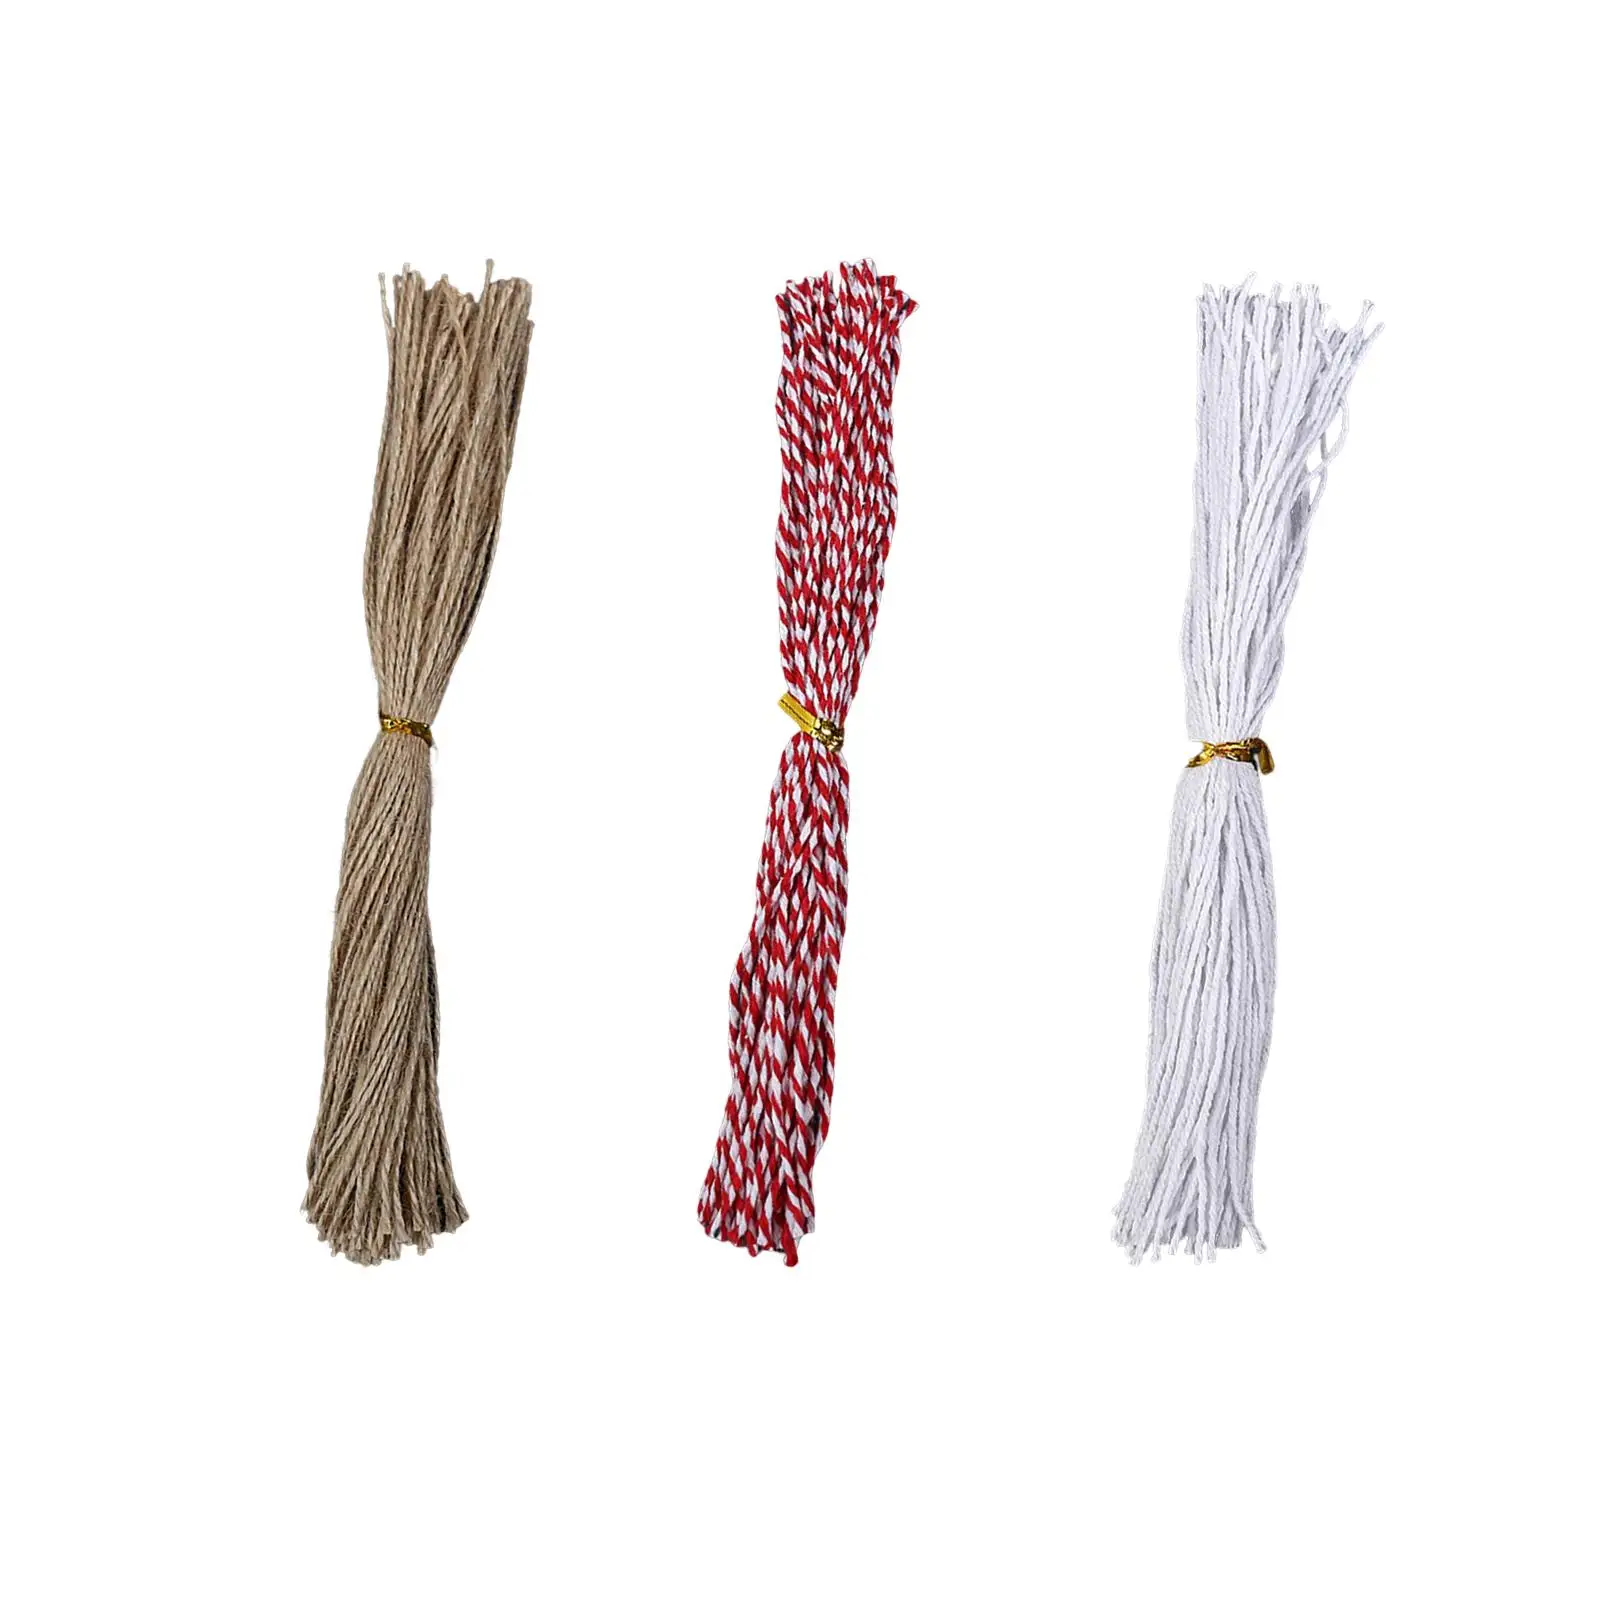 Jute Twine Rope Craft Twine Rope Present Wrapping Cord Packing String for Crafts Tags Cards